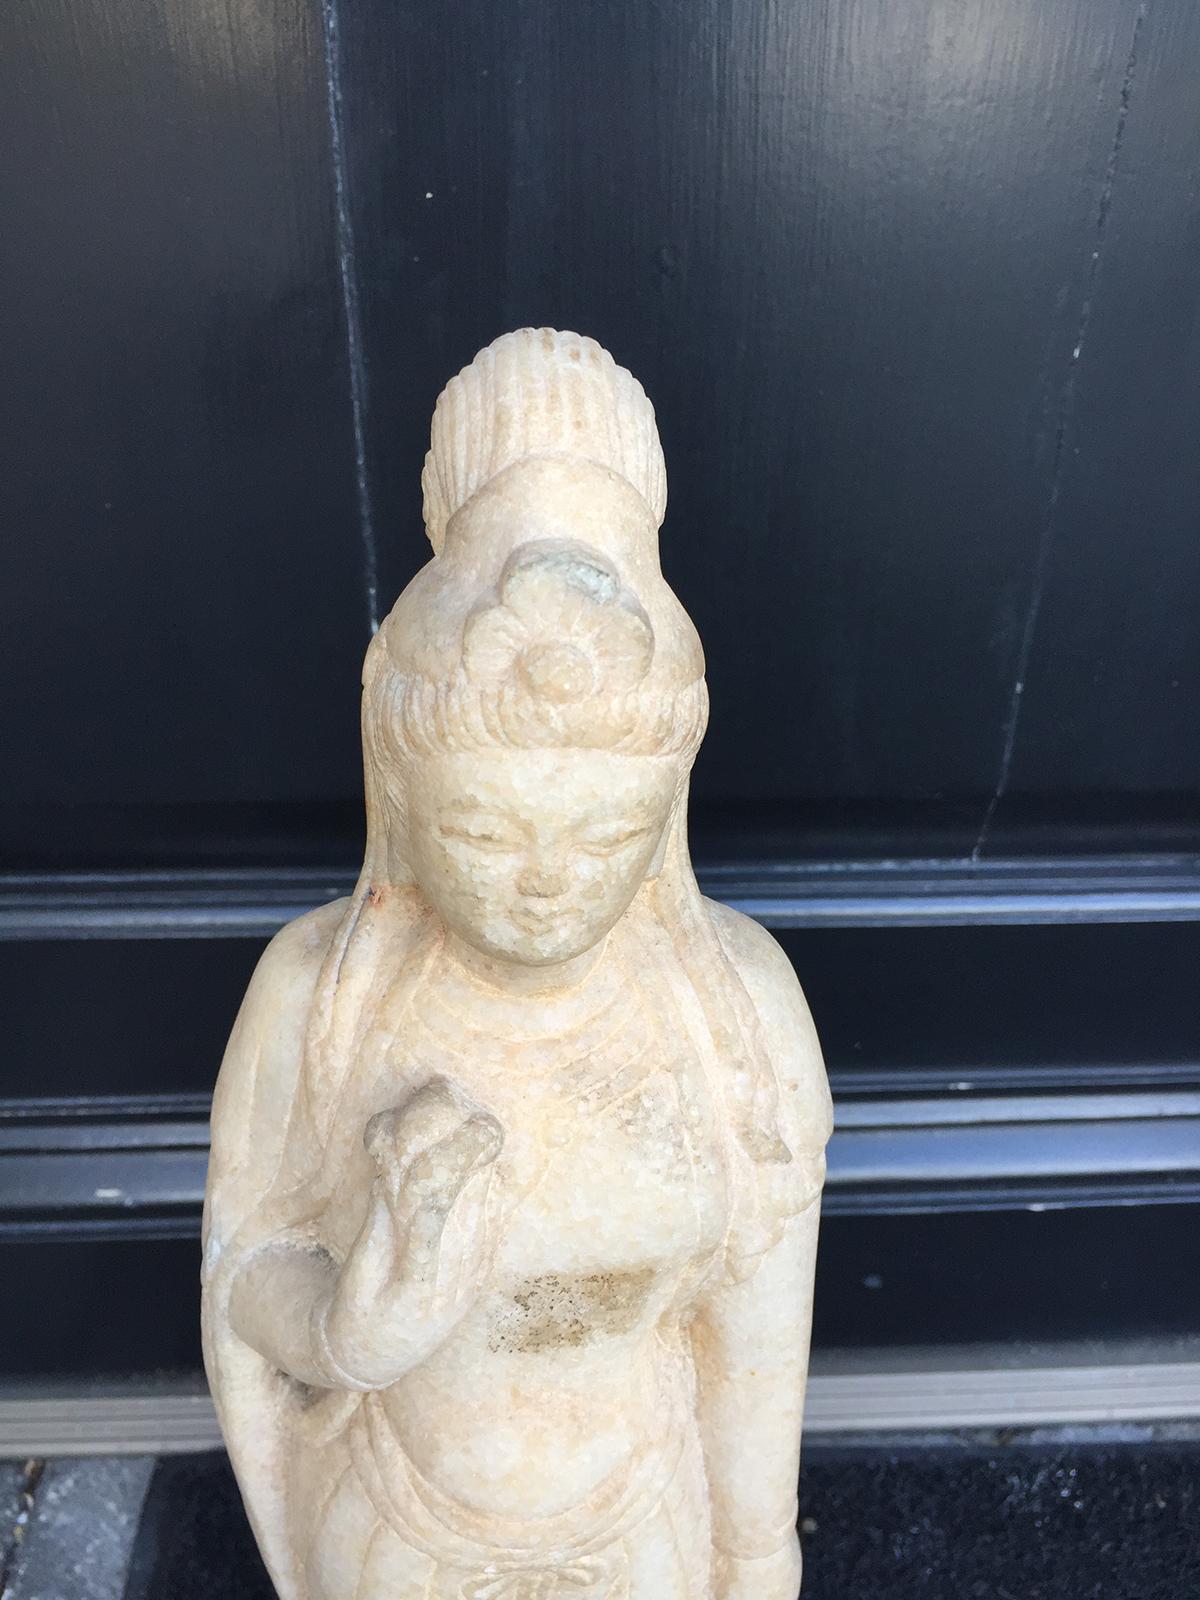 Early 20th century Chinese marble figure.